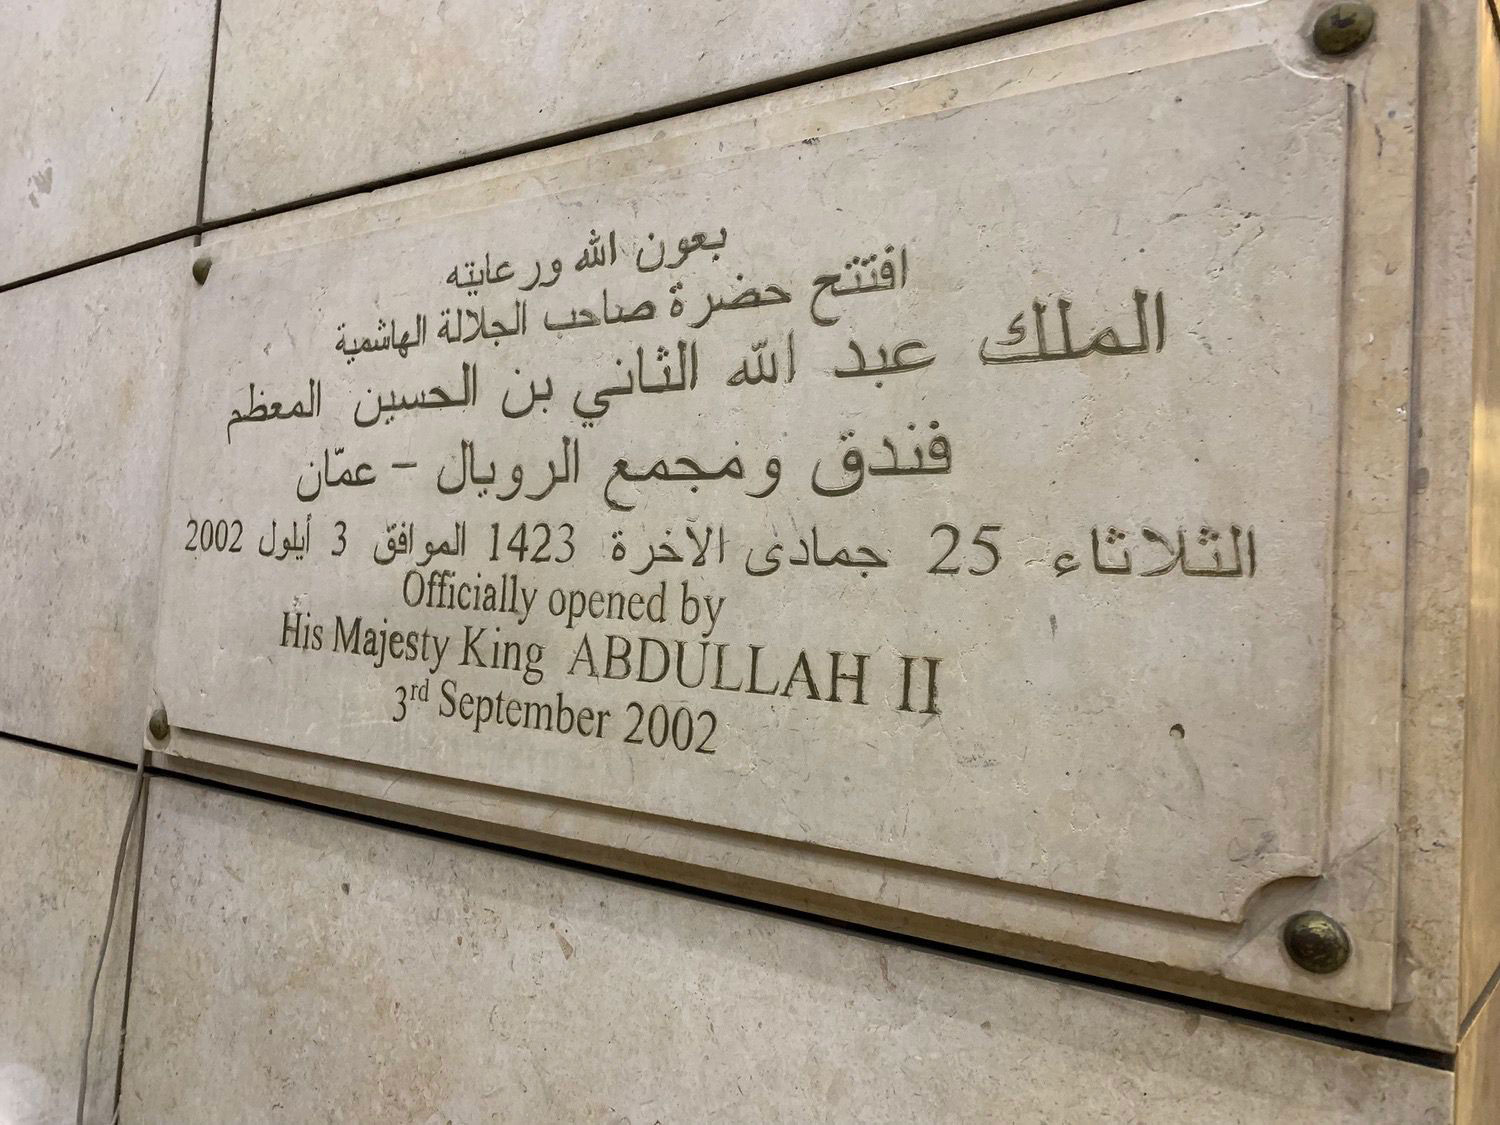 View of a plaque commemorating the 2002 opening by King Abdullah II